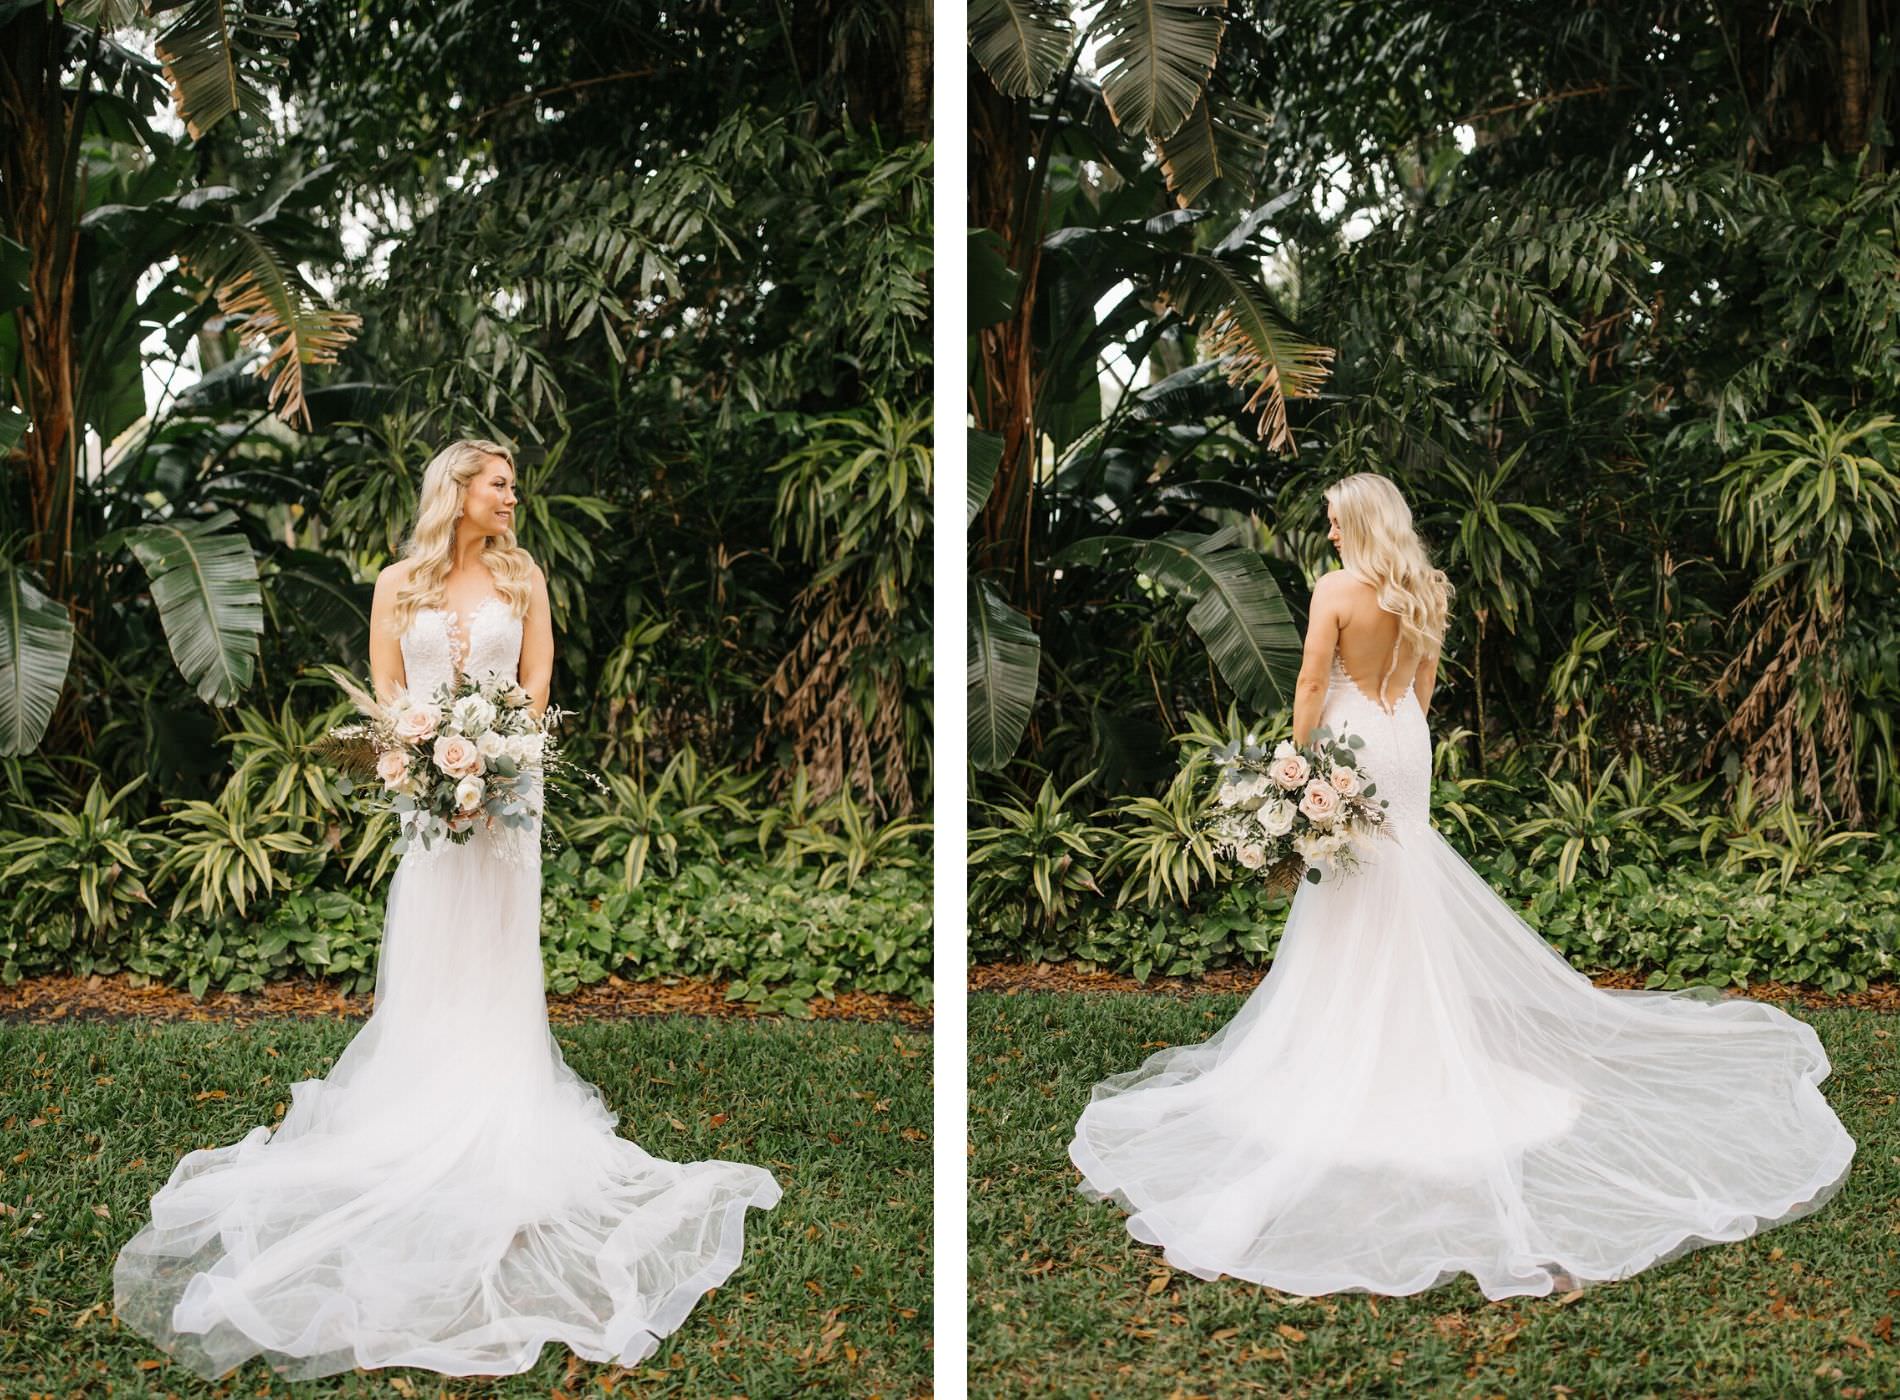 Boho Chic Inspired Florida Bride, Ashley Stegbauer Morrison Wearing Boho Chic Inspired Ines Di Santo Lace Tulle Wedding Dress, White Fit and Flare with Plunging Neckline, V Shaped Open Back, Holding Lush Ivory Flowers and Blush Pink Roses, Pampas Grass, Bouquets with Greenery | Downtown St. Pete Wedding Planner Parties A’ La Carte | Luxury Florida Wedding and Bridal Dress Shop Isabel O’Neil Bridal Collection | Wedding Planner Parties A'la Carte